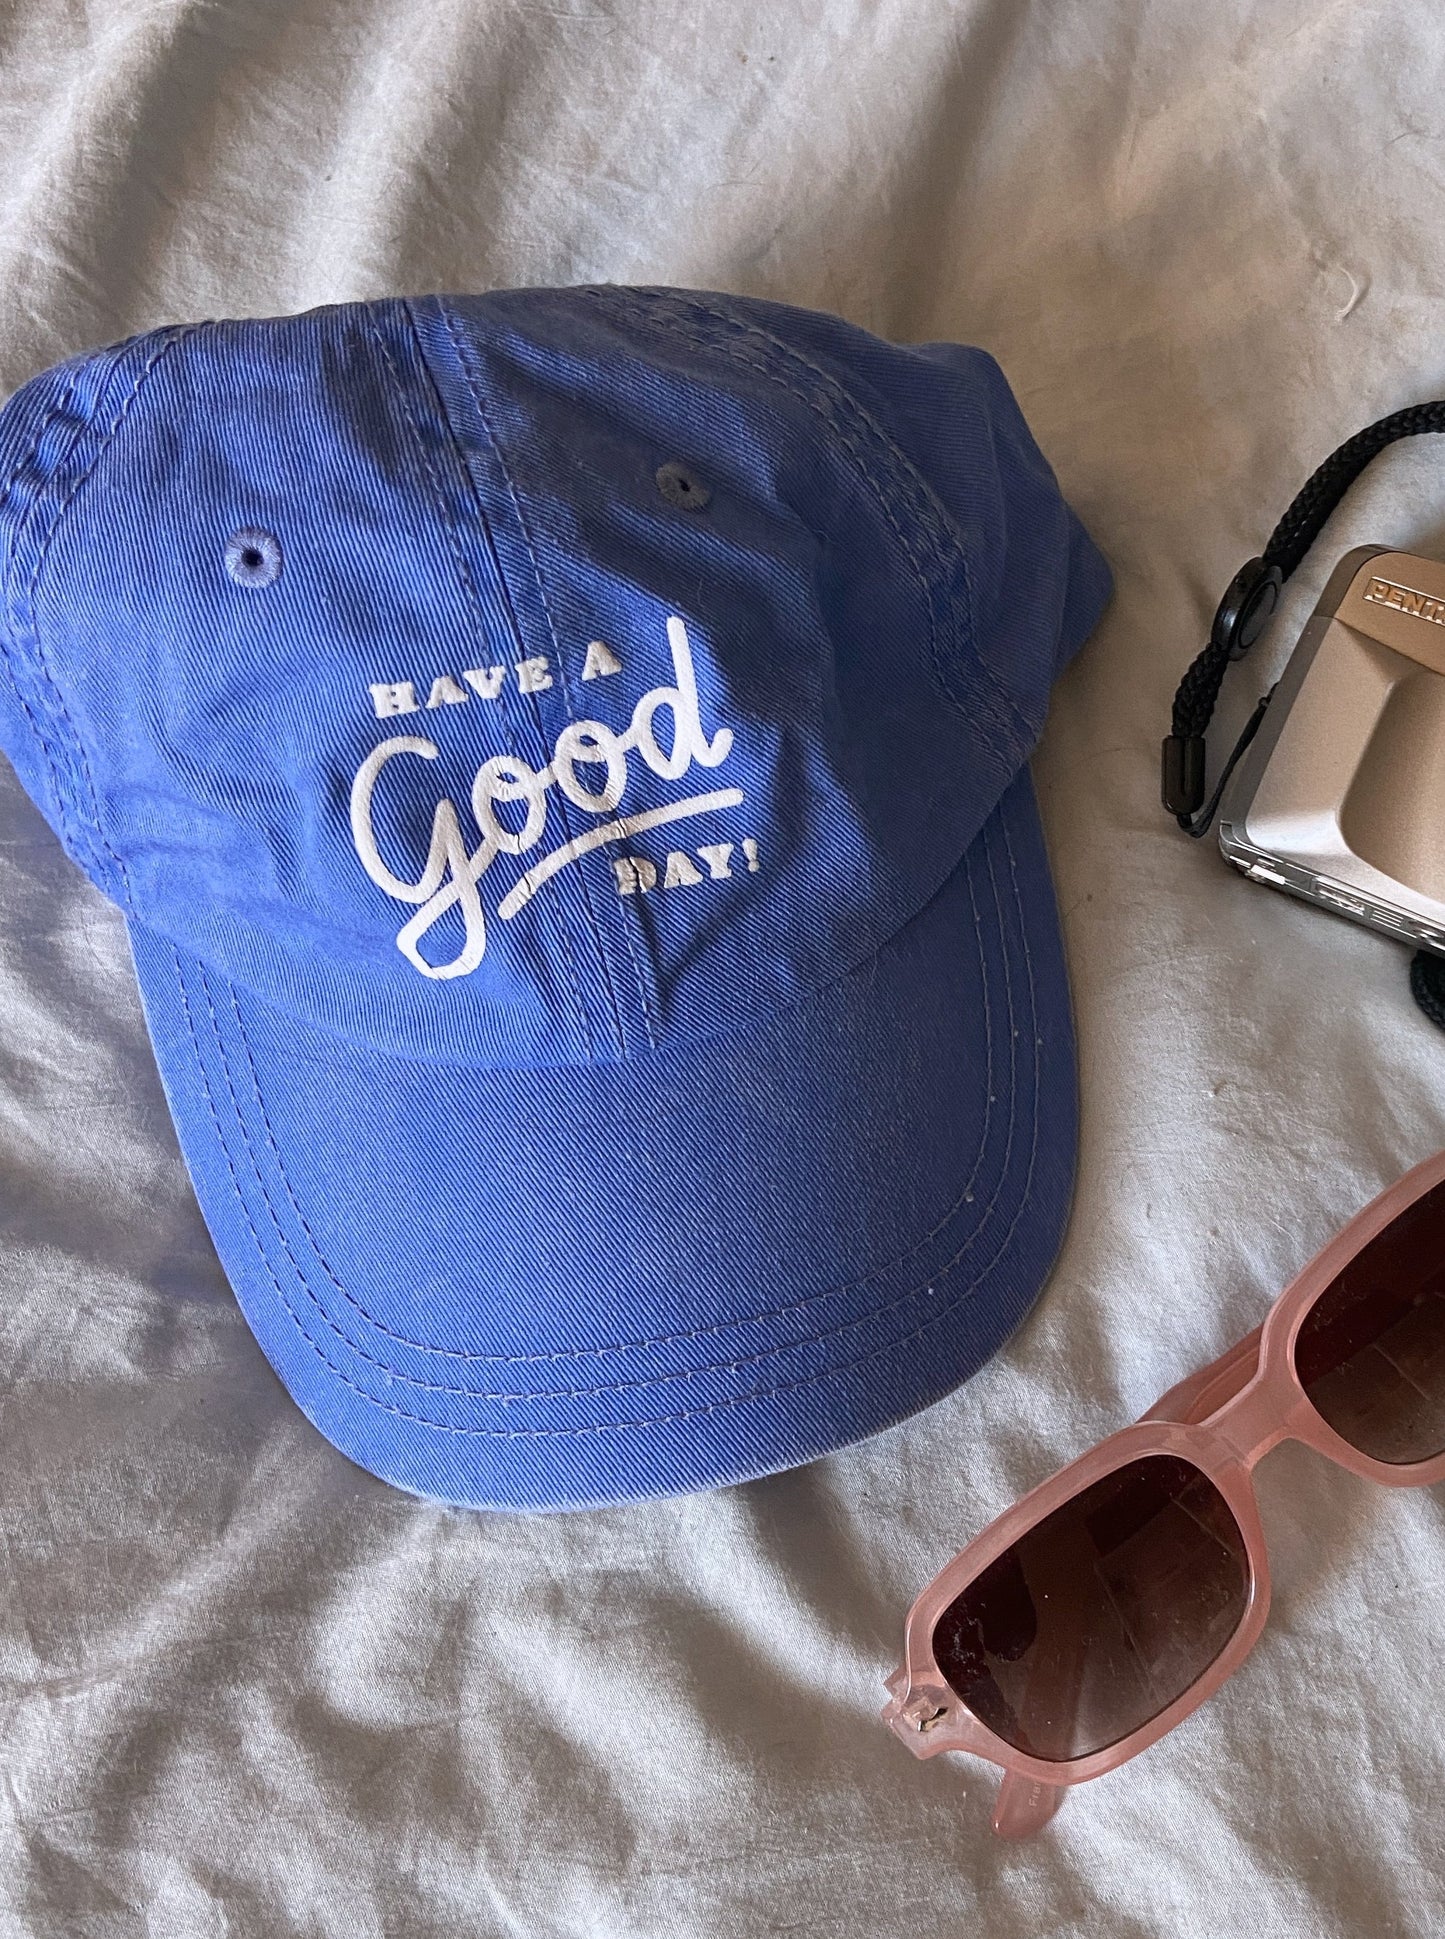 Have a Good Day - dad hat